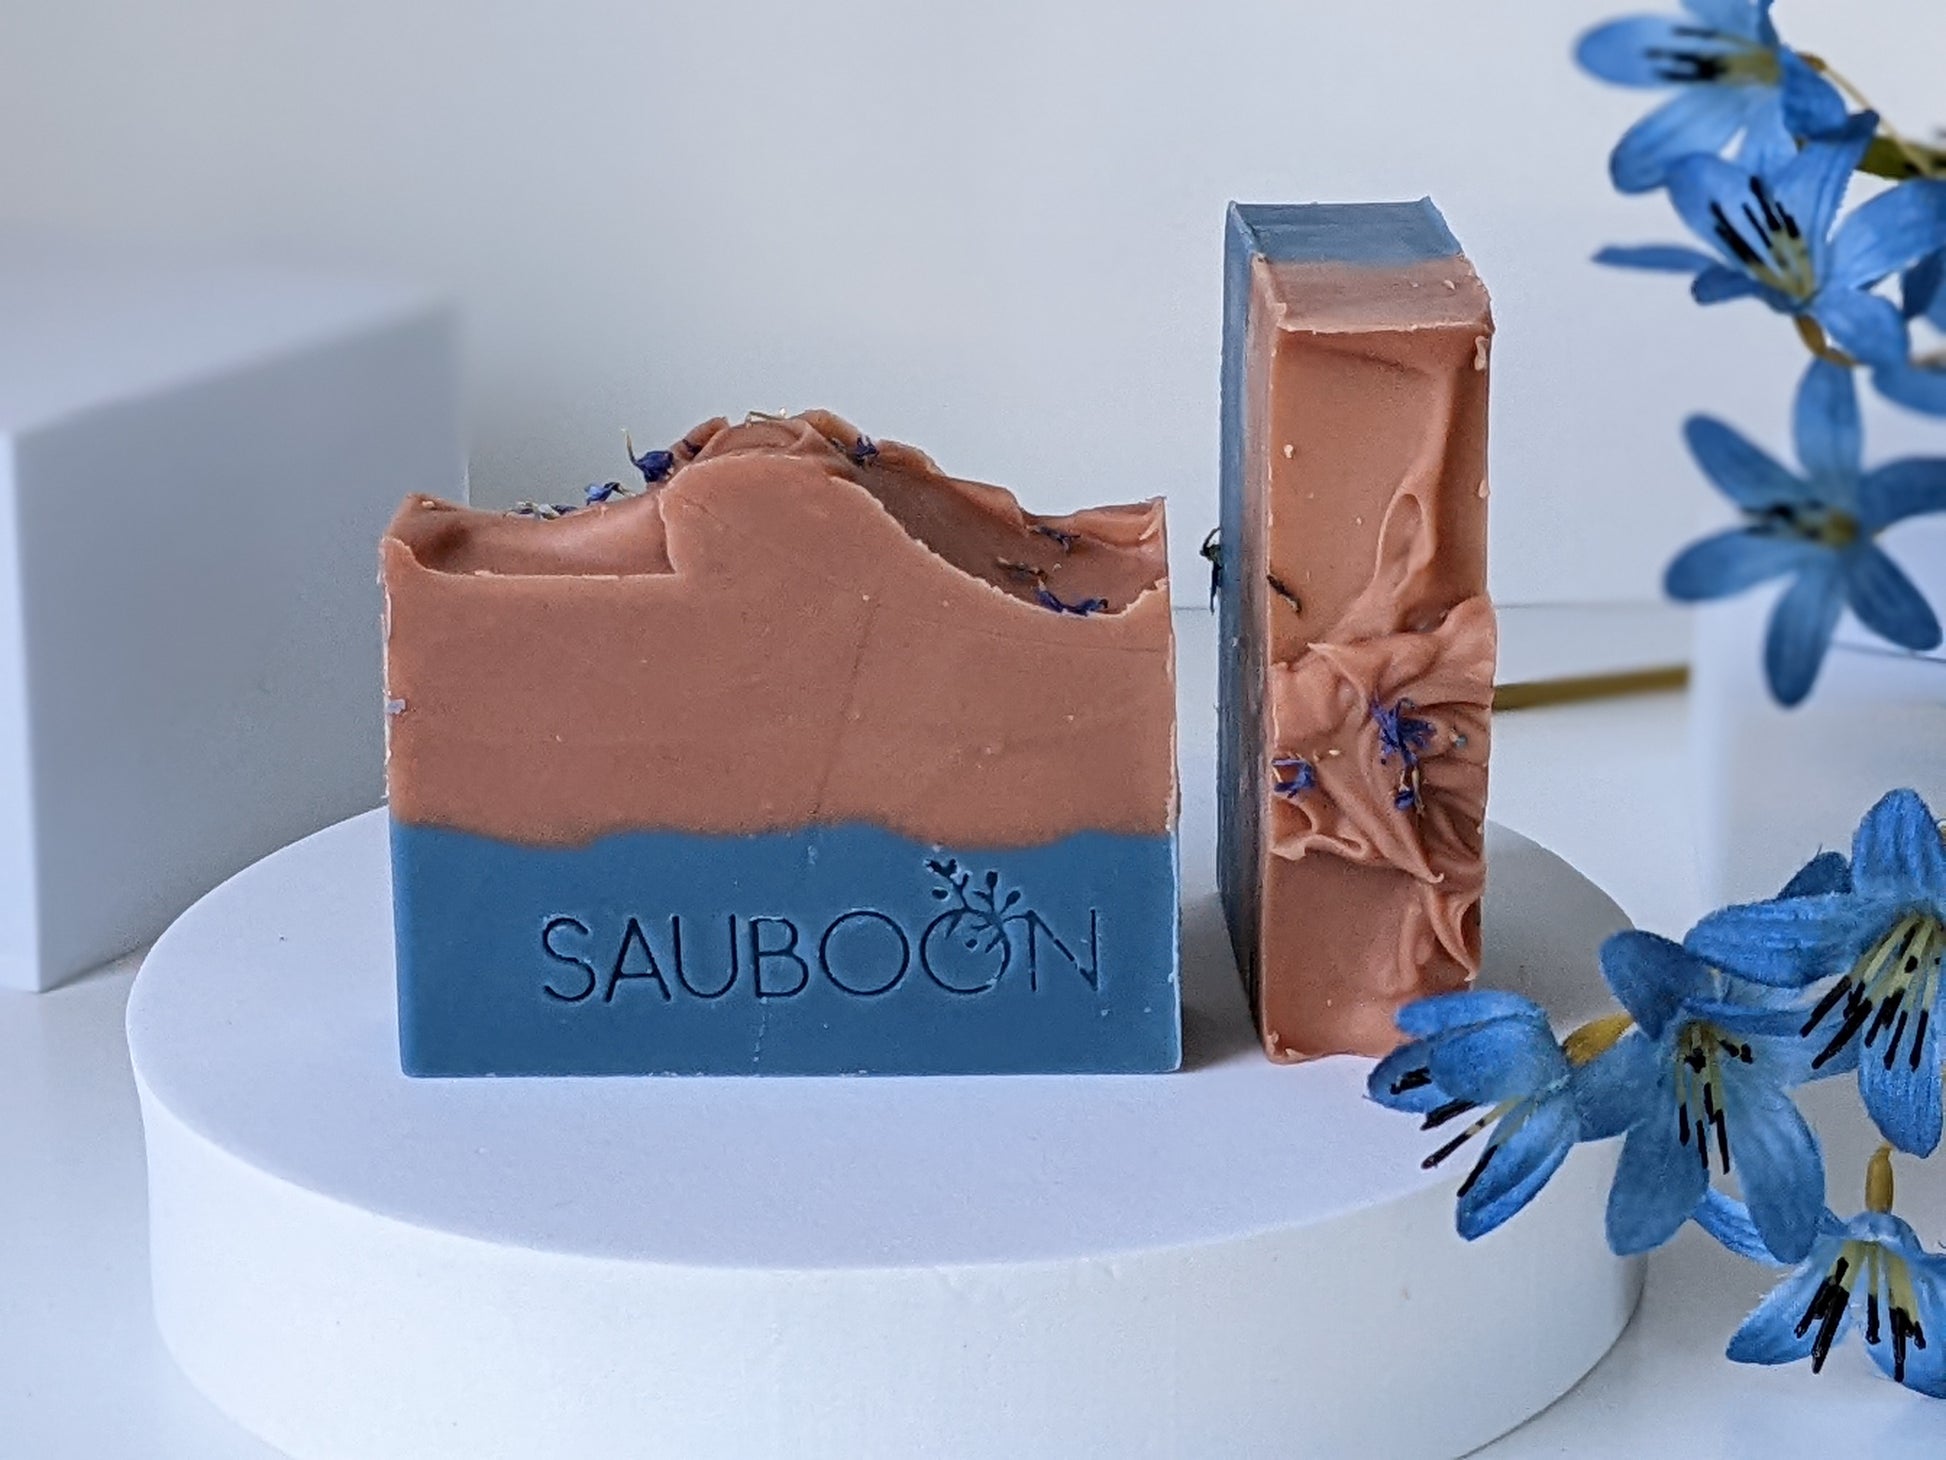 Our handcrafted luxurious soaps are made locally here in San Diego in small batches.  Highest quality ingredients used to give the best lather, nourishment, and cleansing experience.  We use different type of clays in each soap including rhasoul clay, kaolin clay, rose clay, red Moroccan clay, French green clay which add to the beautiful washing experience using our soaps. Great for gifting for birthdays, celebrations, bridal showers or self care gift to yourself!